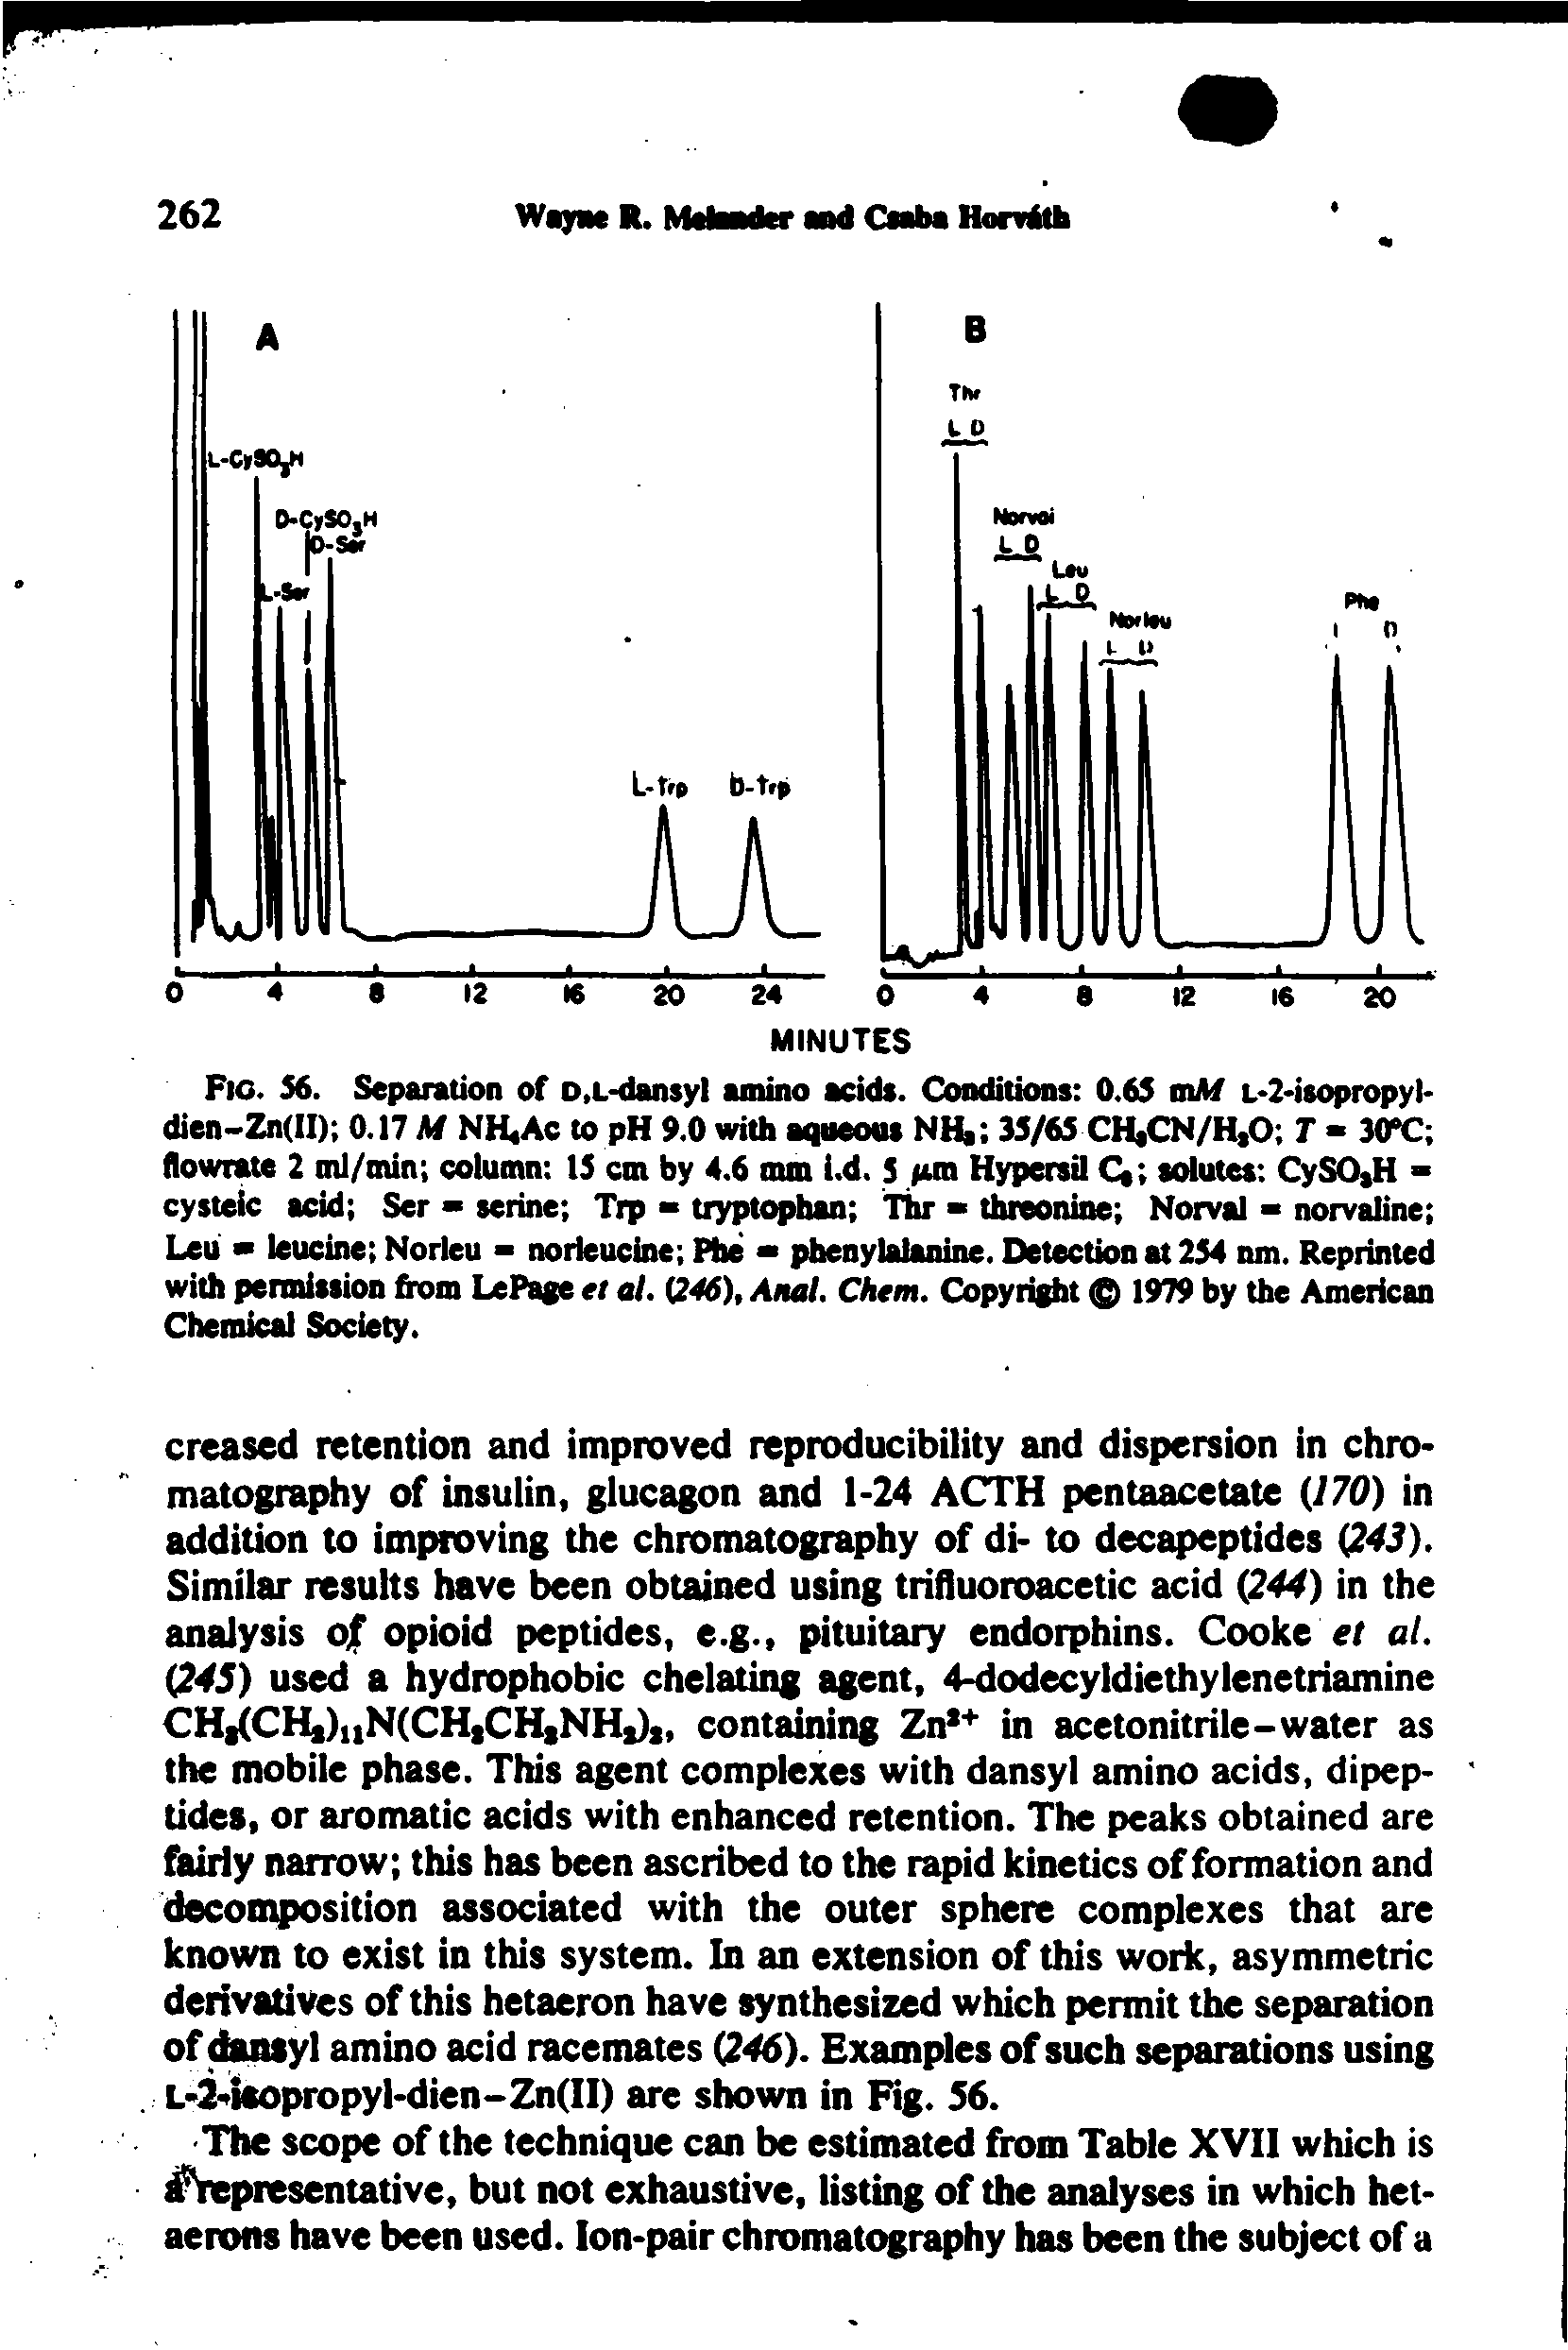 Fig. S6. Separation of D,L-dansyl amino acids. Conditions 0.65 oiAf L 2>isopropyl-dien-Zn(II) 0.17 A NH,Ac to pH 9.0 with aqueous NI 35/65 CH,CN/H,0 T - 30 flowrate 2 tnl/min column 15 cm by 4.6 mm i.d. S iun Hypersil C solutes CySO H -cysteic acid Ser - serine Trp - tryptophan thr - threonine Norval - norvaline Leu w leucine Norleu - norleucine Phe phenylalanine. Detection at 254 nm. Reprinted with permission from LePage ef at. C246), Am/. Chem. Copyright 1979 by the American Chemical Society.